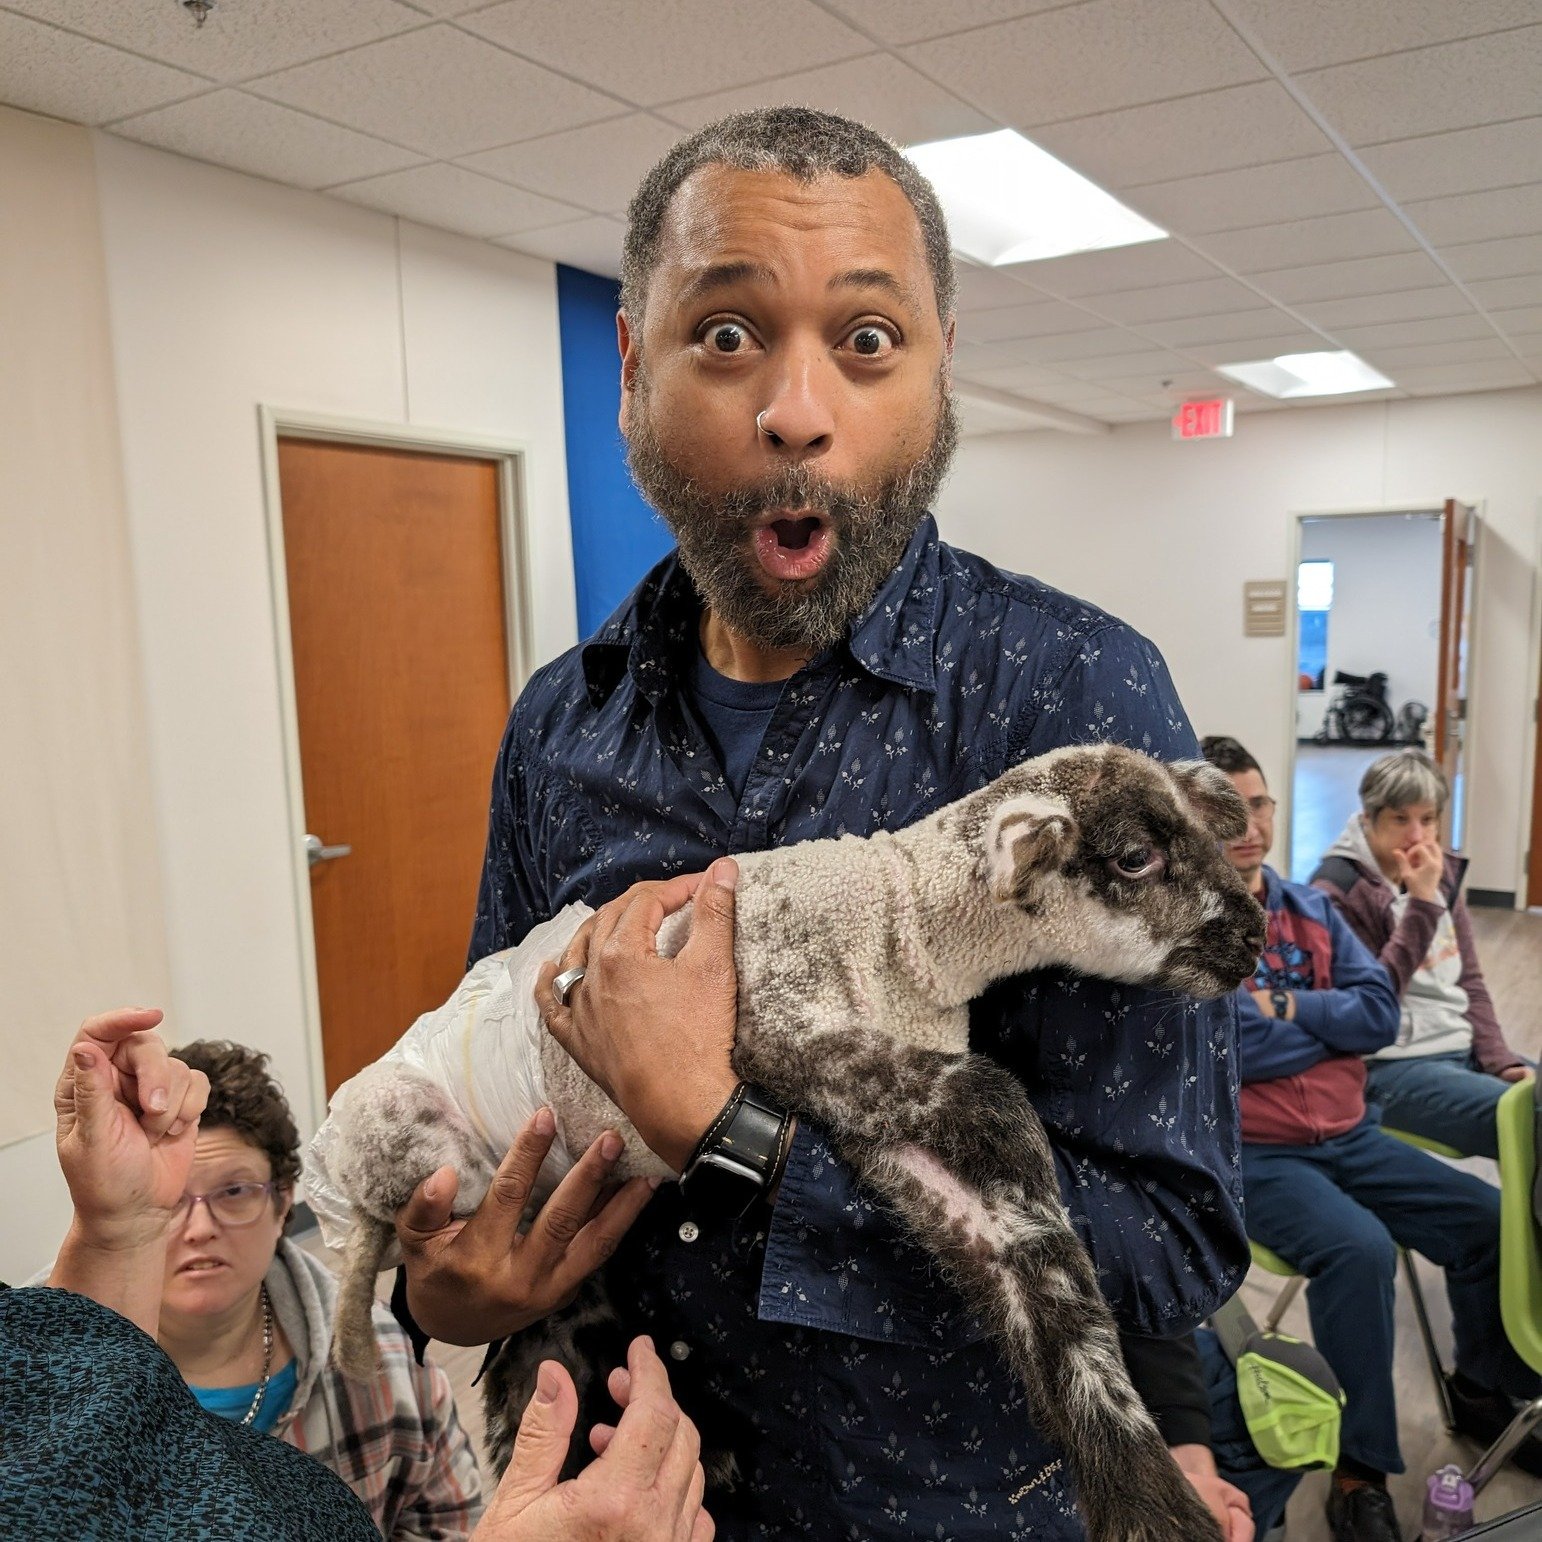 Thank you to the Sawyer 'Ever Ready' Farm for sharing these adorable two-week old lambs with team members in our day program today! There is nothing in the world quite like a newborn lamb!